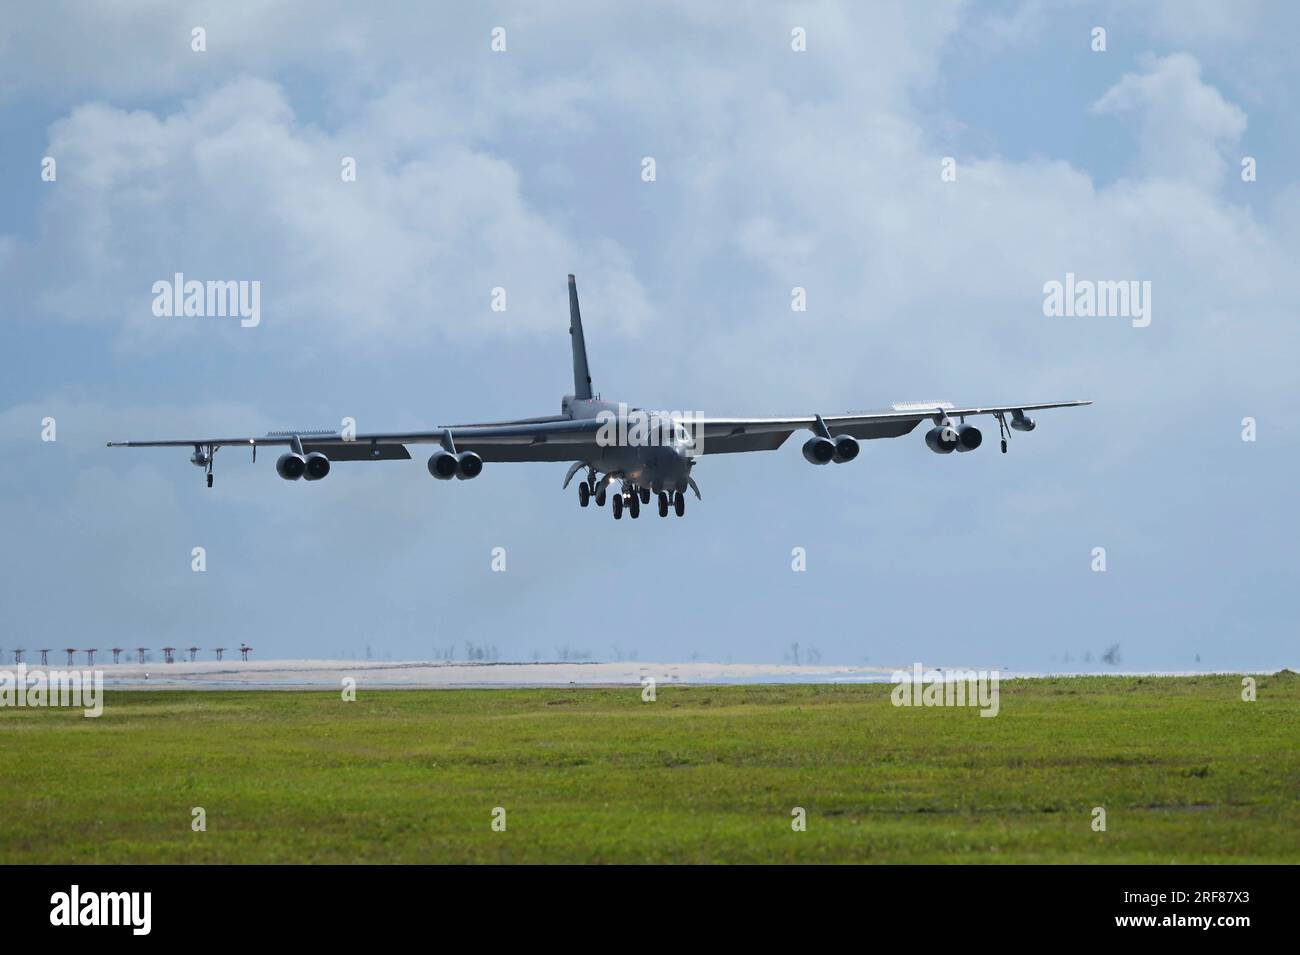 Yigo, United States. 14 July, 2023. A U.S. Air Force B-52H Stratofortress strategic bomber assigned to the 20th Expeditionary Bomb Squadron approaches to land at Andersen Air Force Base, July 14, 2023 in Yigo, Guam, USA.  Credit: A1C Nia Jacobs/U.S. Air Force Photo/Alamy Live News Stock Photo